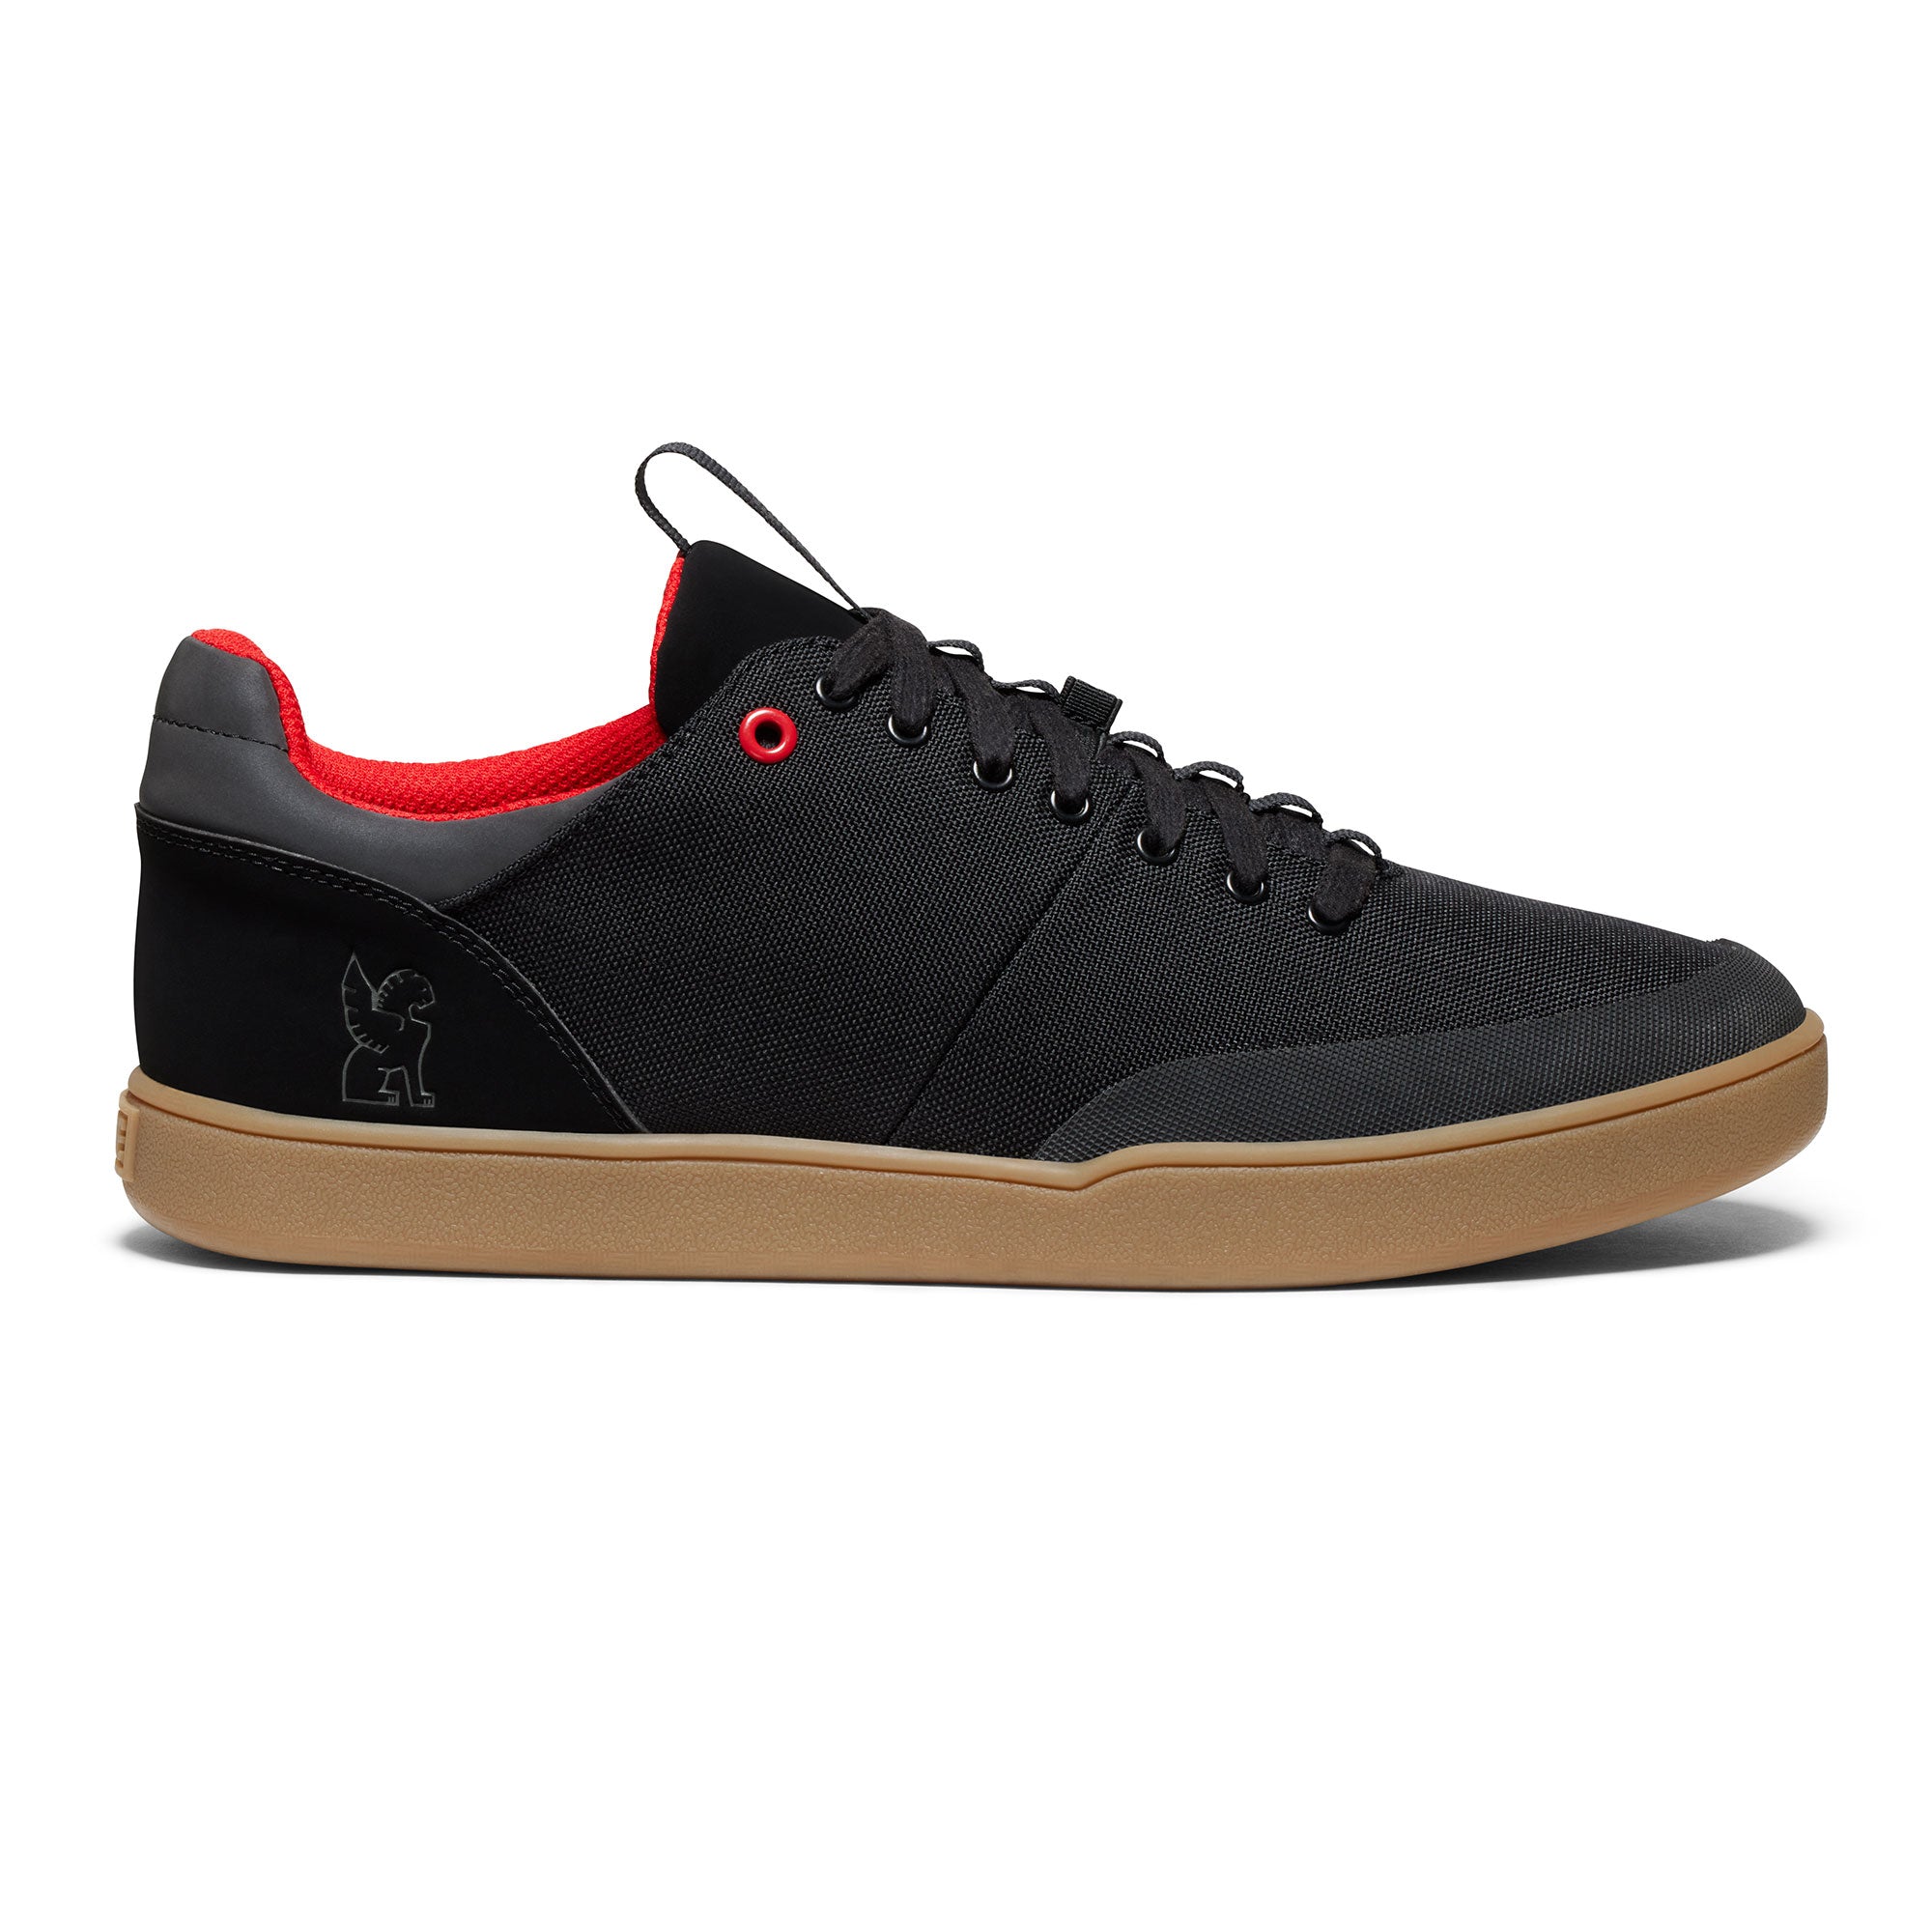 Bromley Low lifestyle sneaker in black #color_black gum